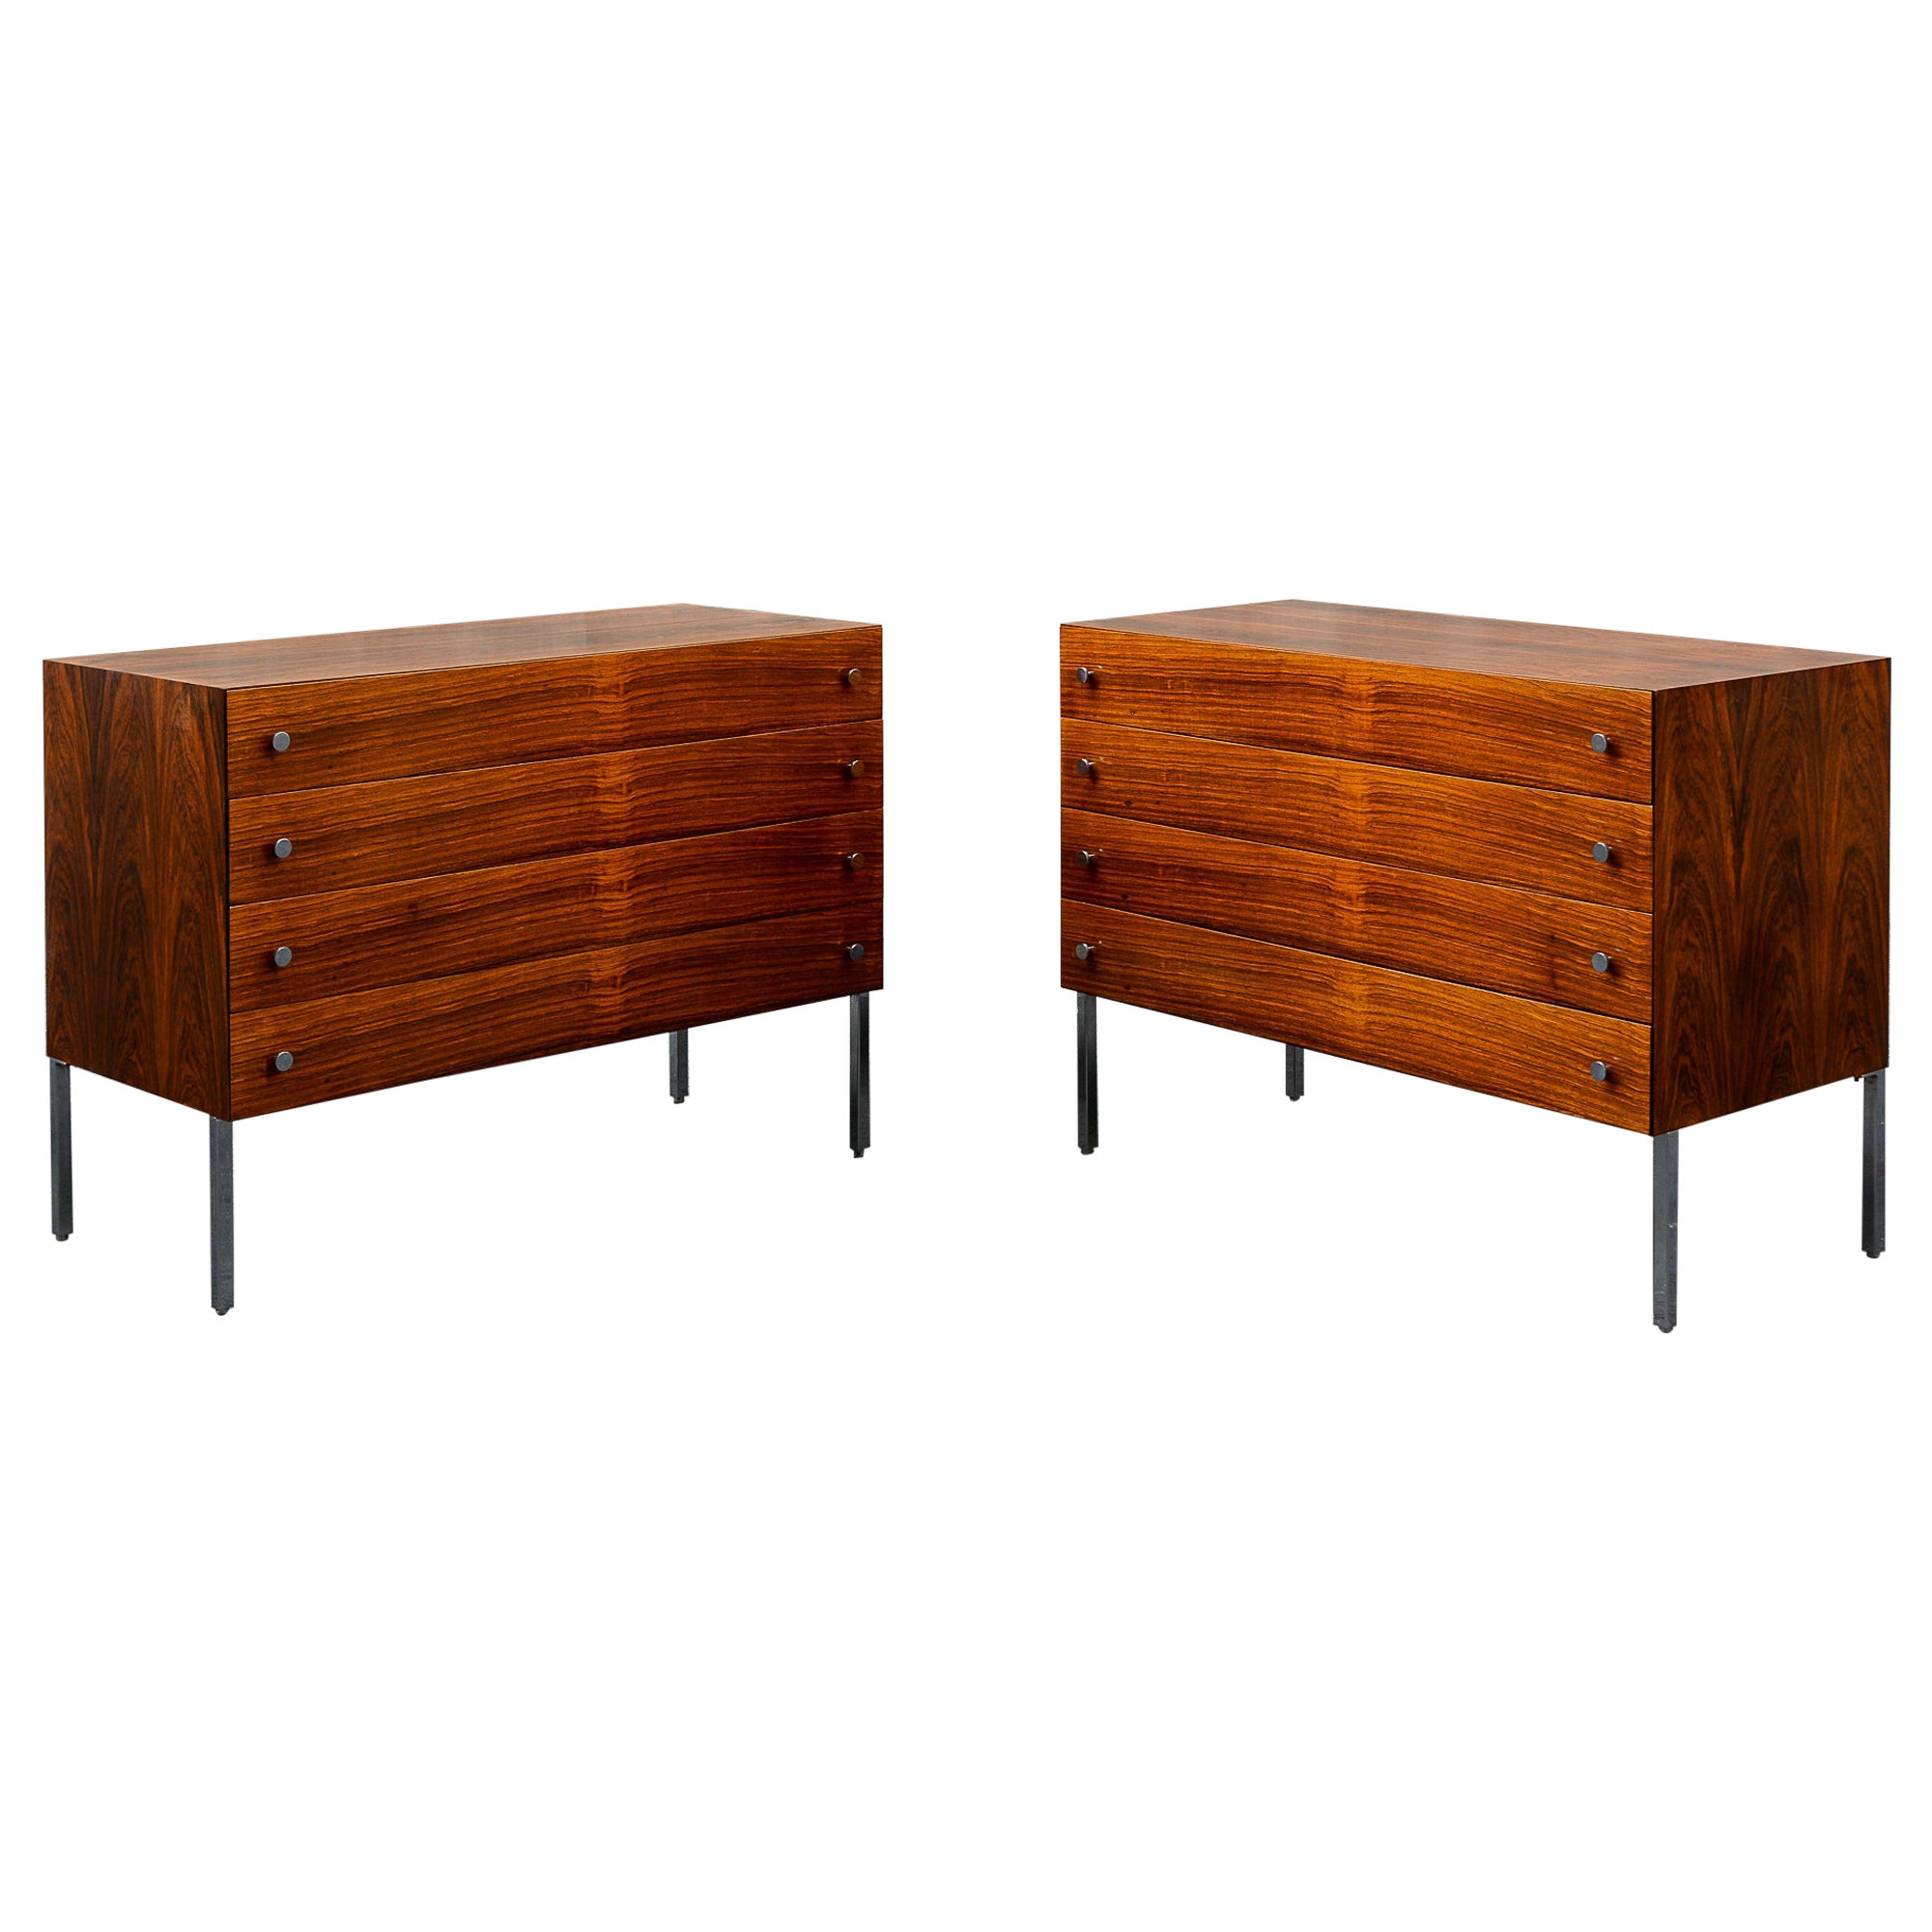 Pair of Rosewood Chests by Poul Norreklit for Sigurd Hansen im Angebot